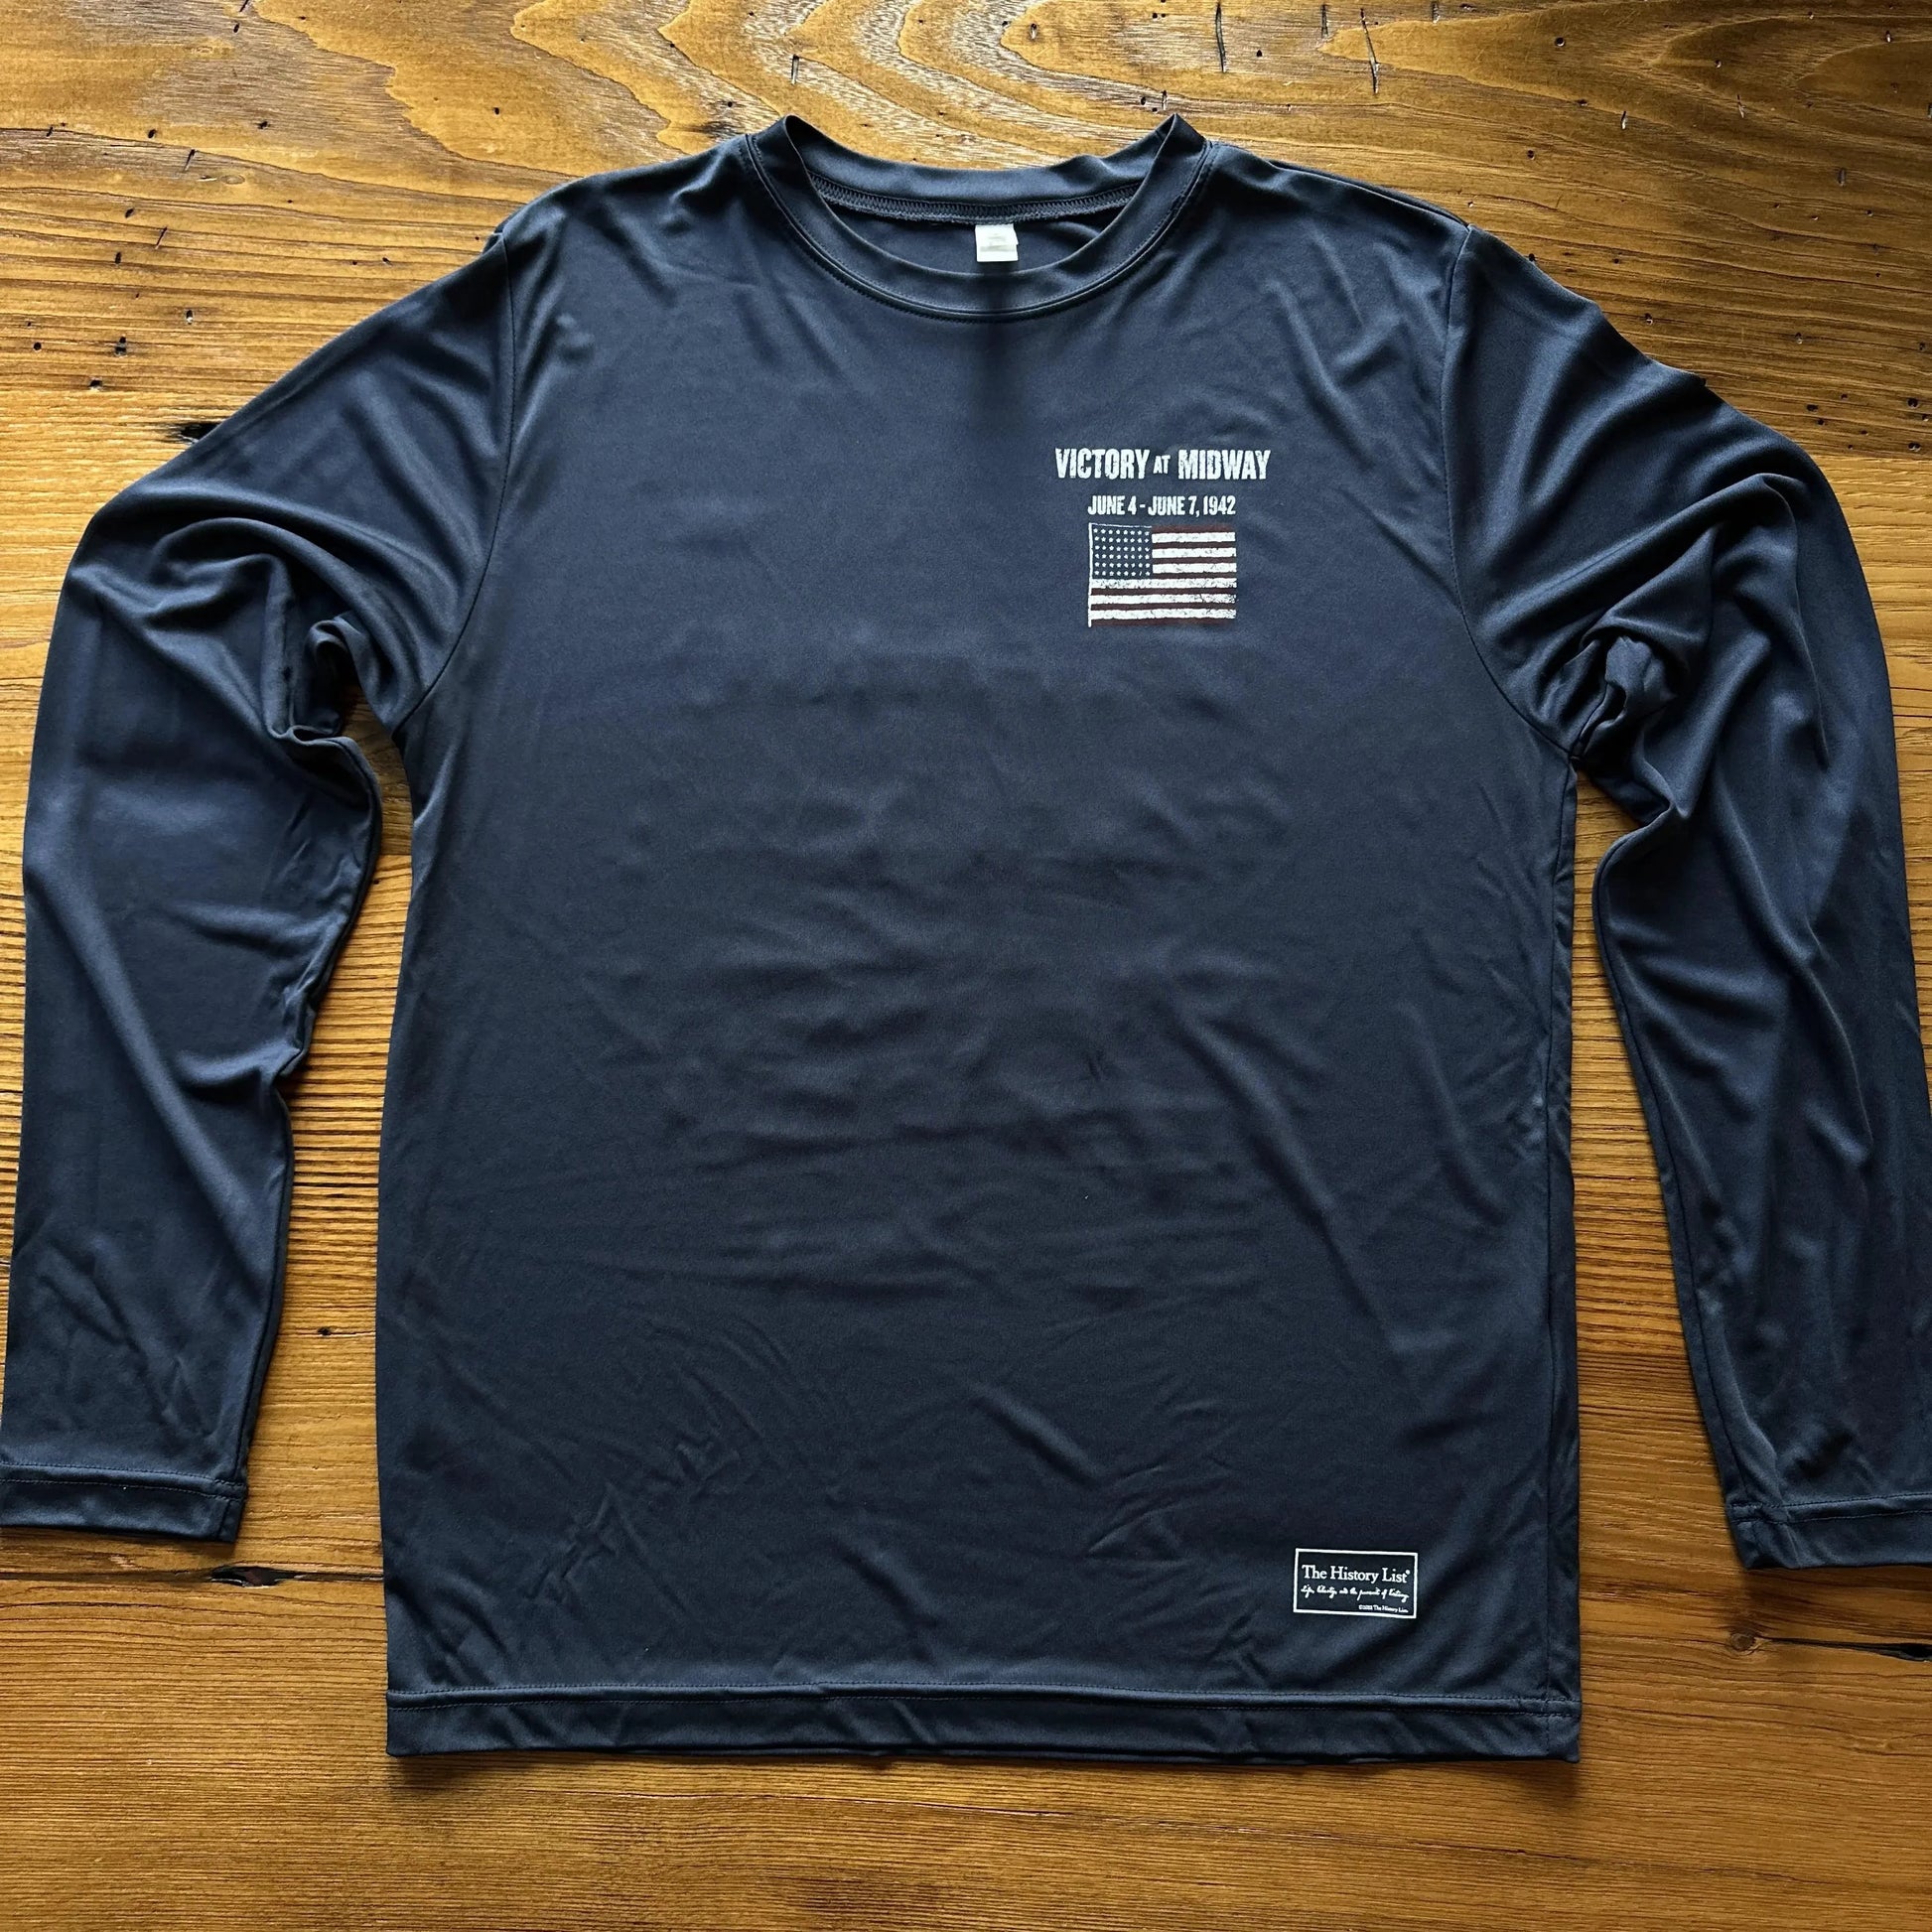 Front of Men's "Victory at Midway" on moisture-wicking 100% polyester interlock with SPF 40+ UV protection - Long-sleeved from The History List store